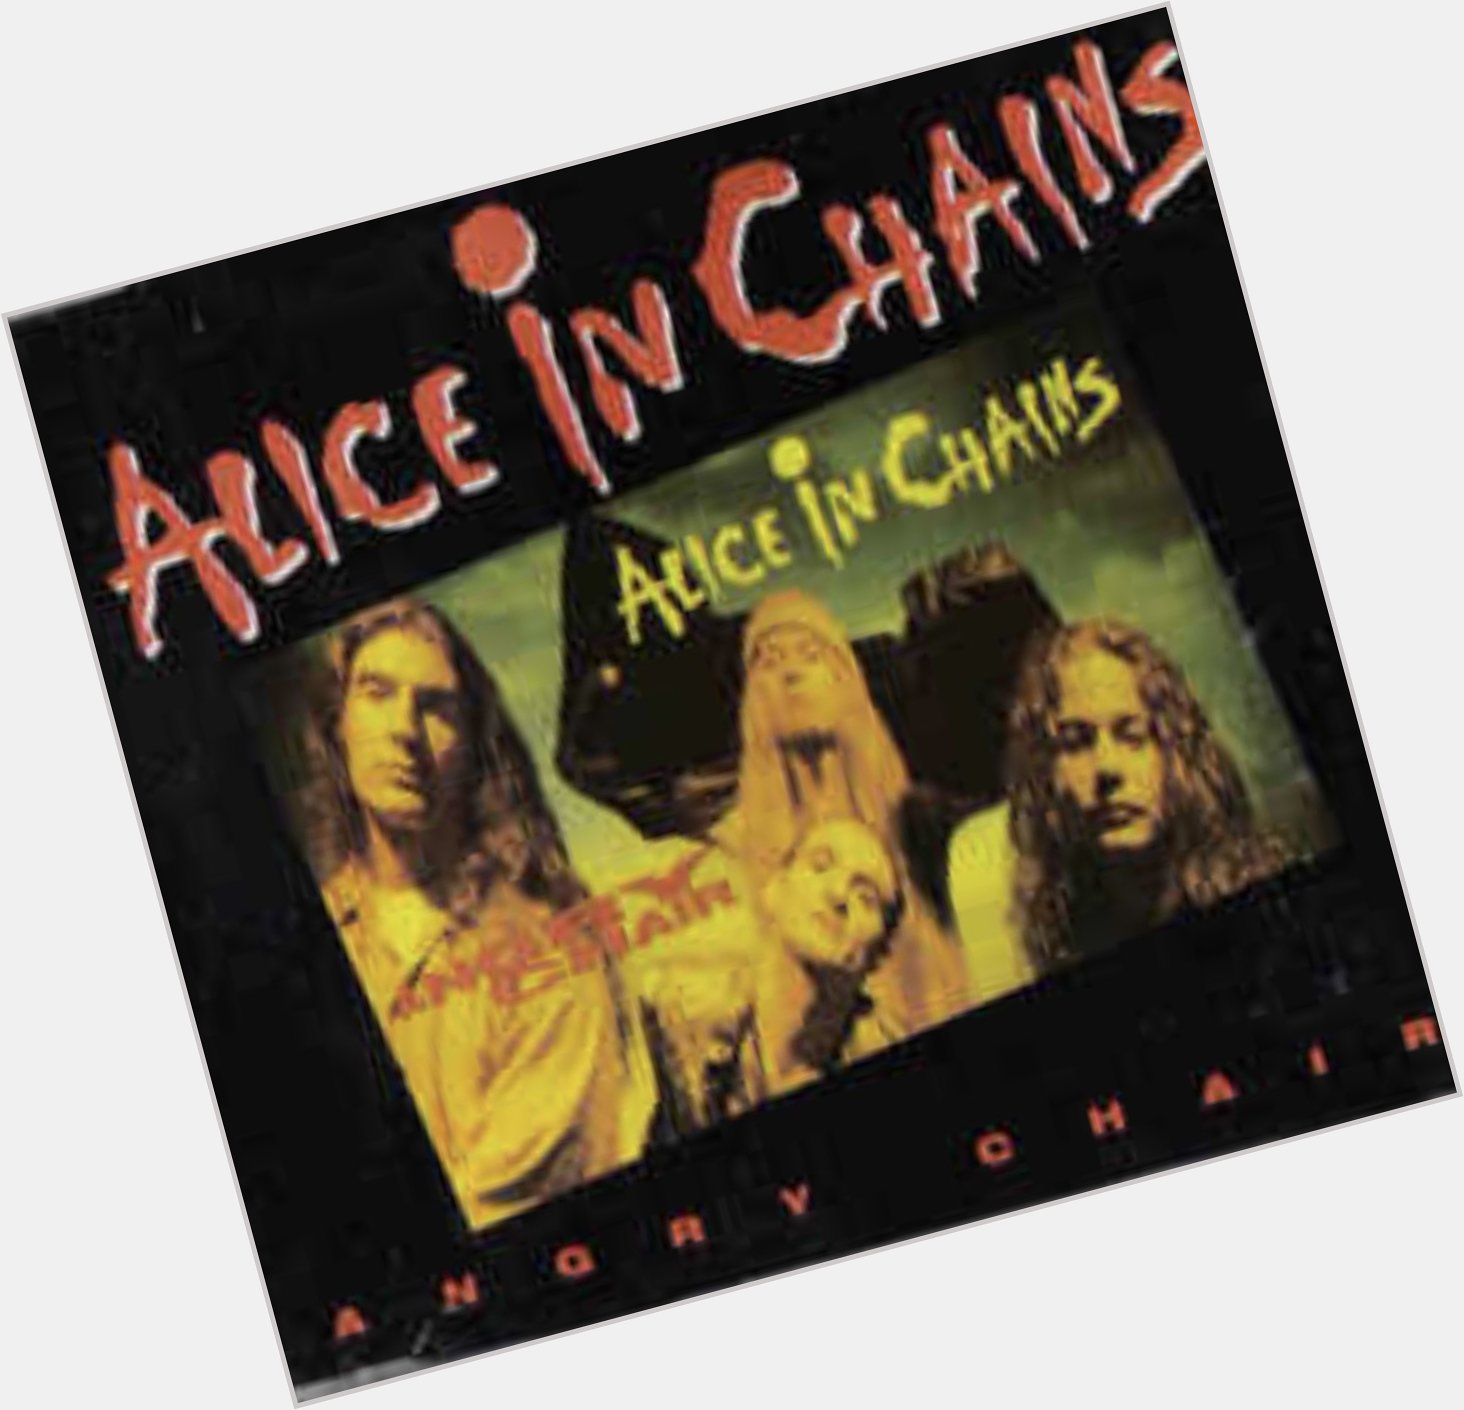 Alice In Chains Angry Chair from the great album Dirt. Happy Birthday to my old friend drummer Sean Kinney 